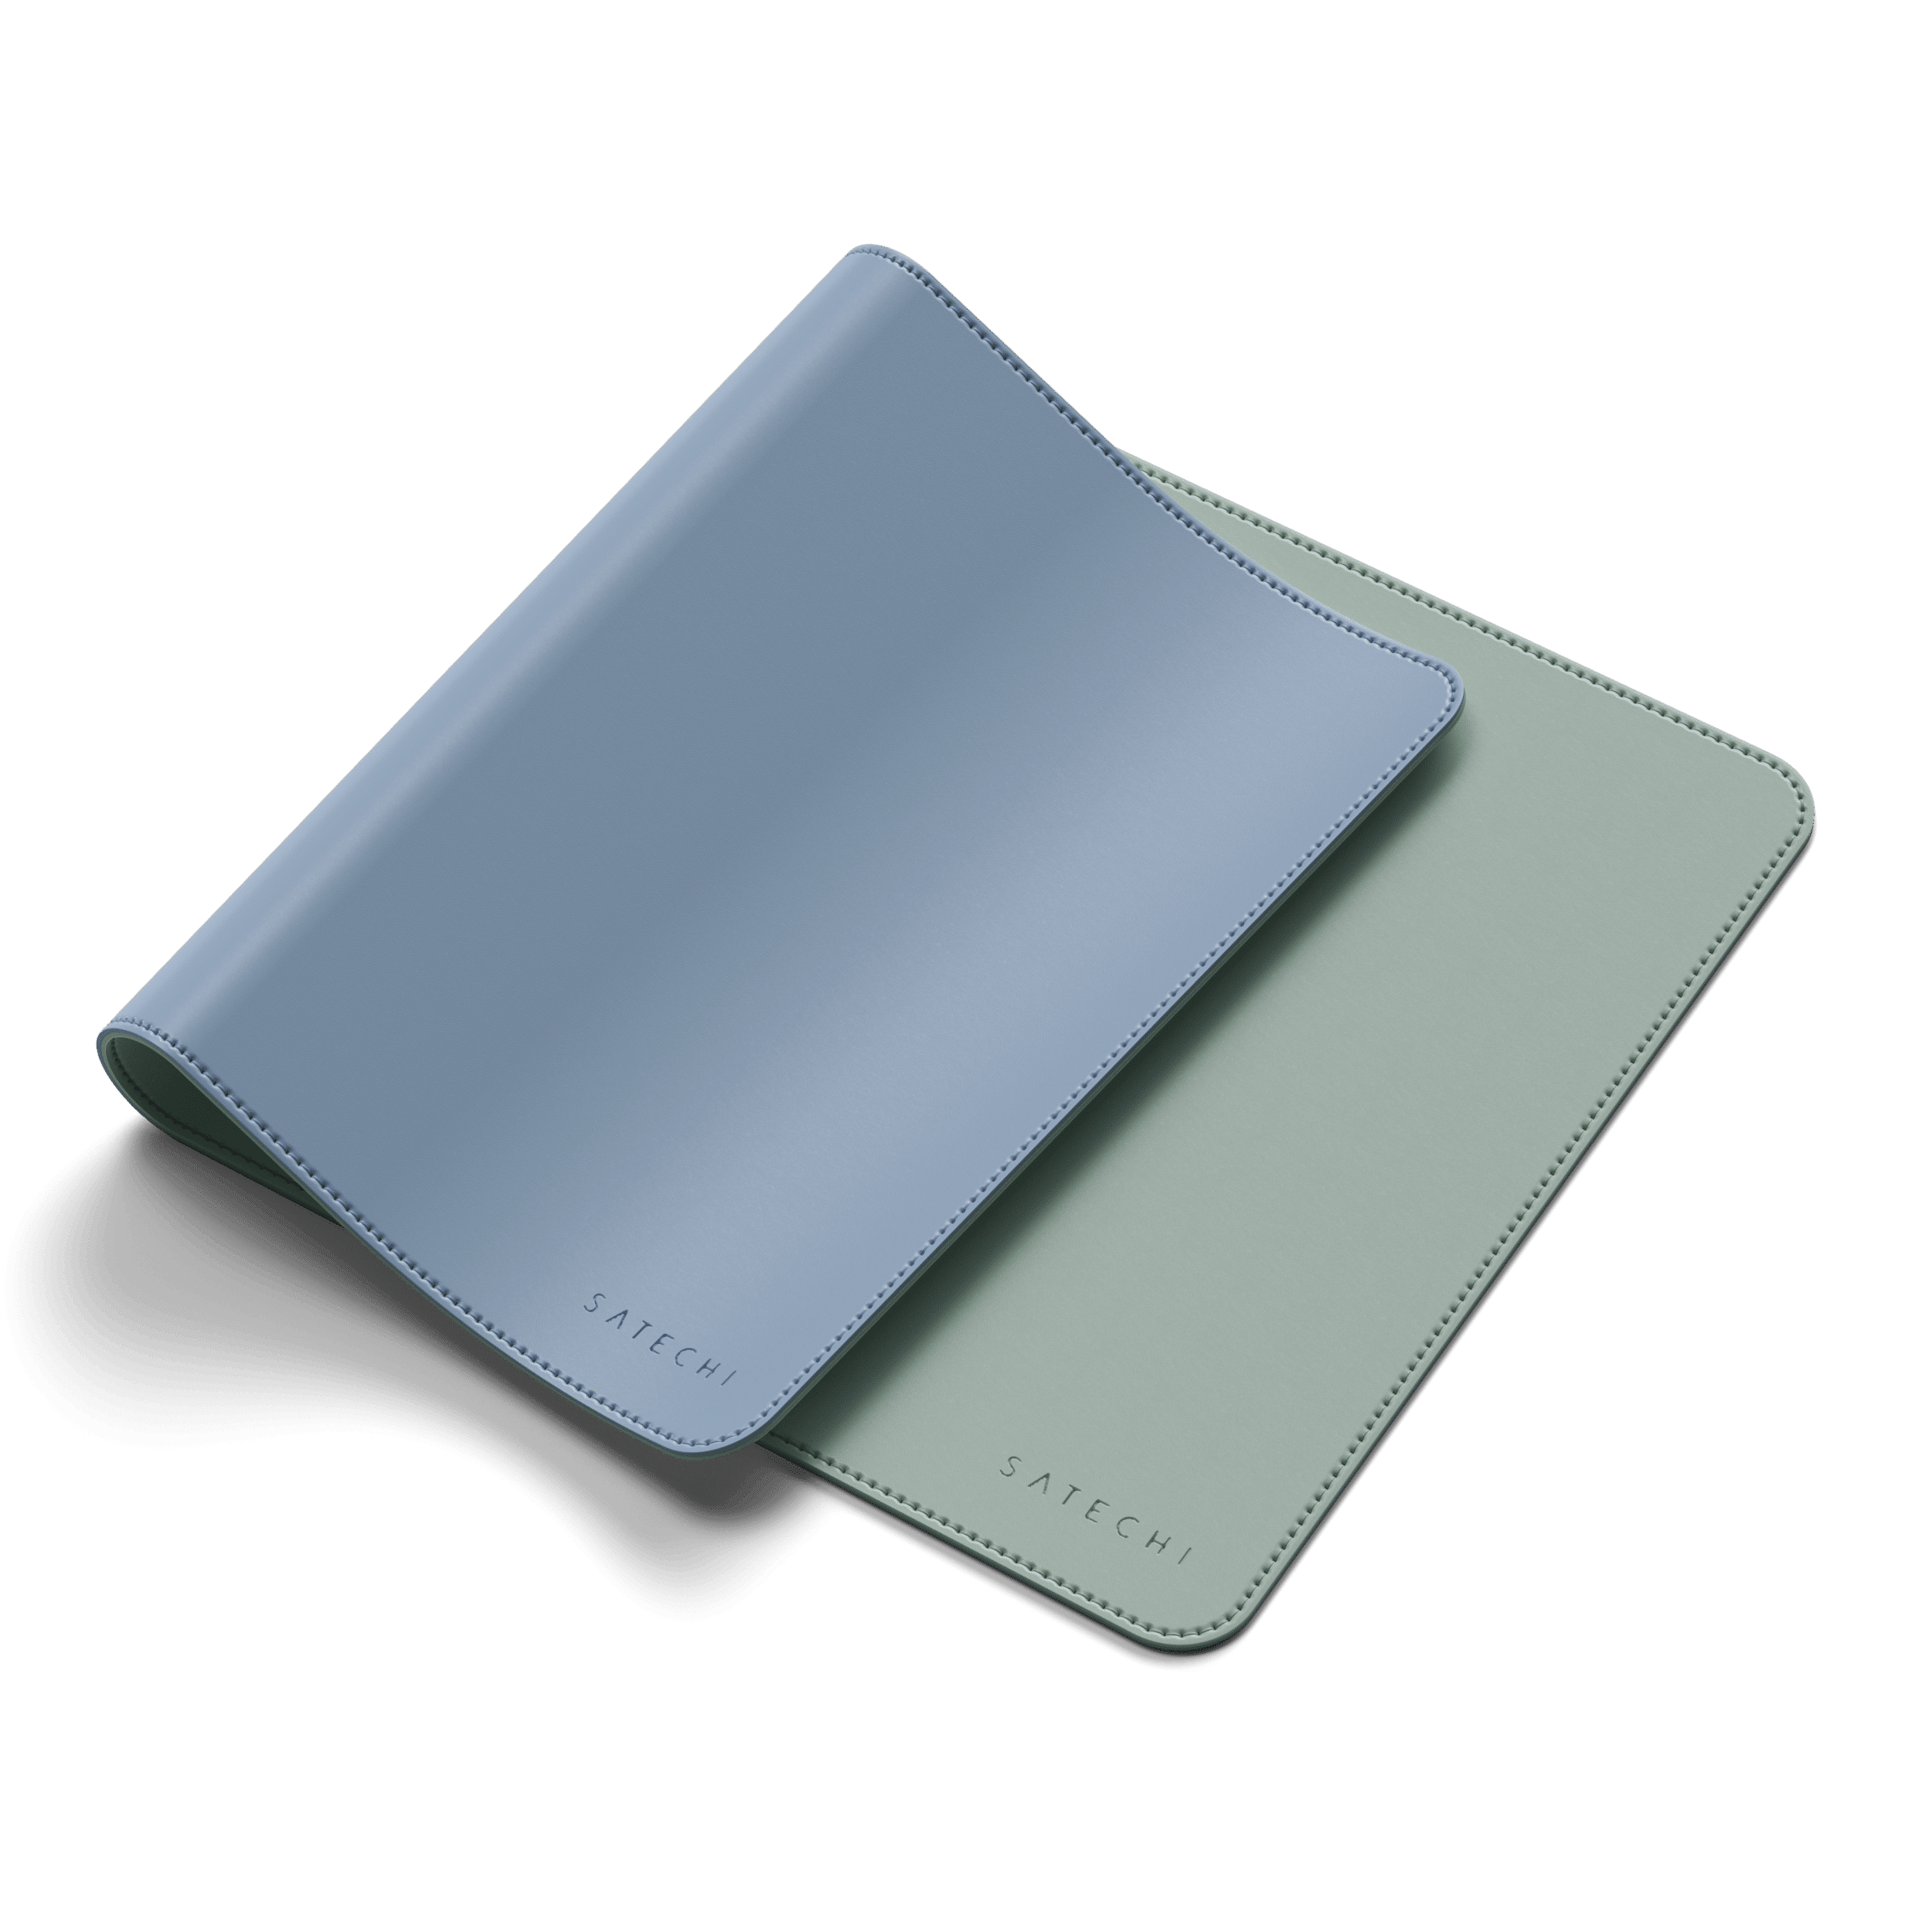 Dual Sided Eco-Leather Deskmate Desk Mats Satechi Blue & Green